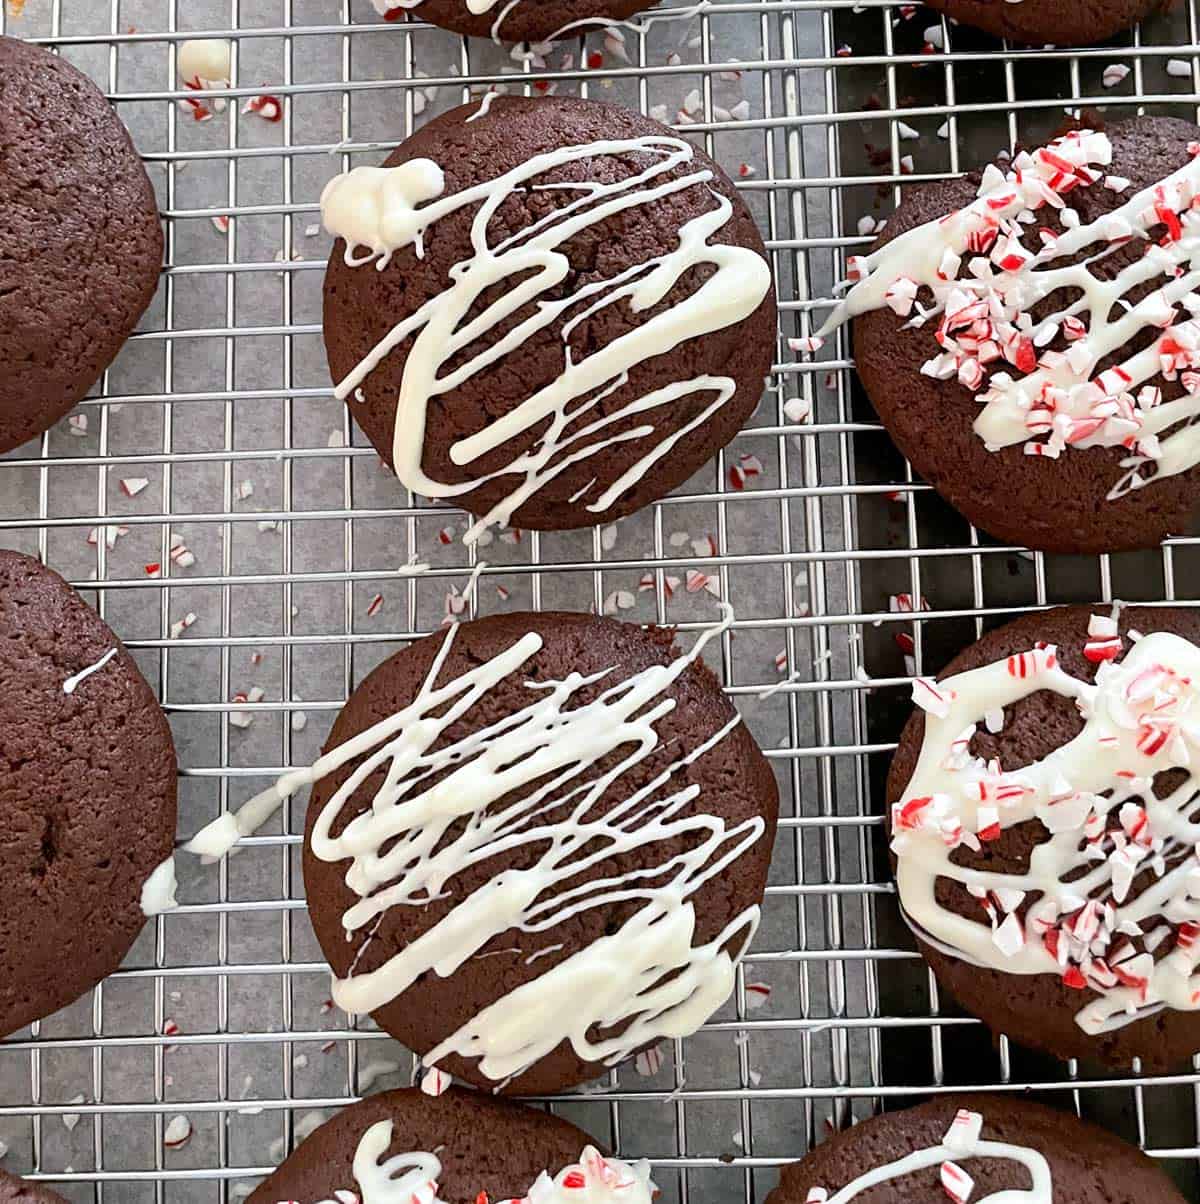 Espresso chocolate cookies on a rack that show no icing, then with white chocolate, and finally with white chocolate and crushed peppermint.